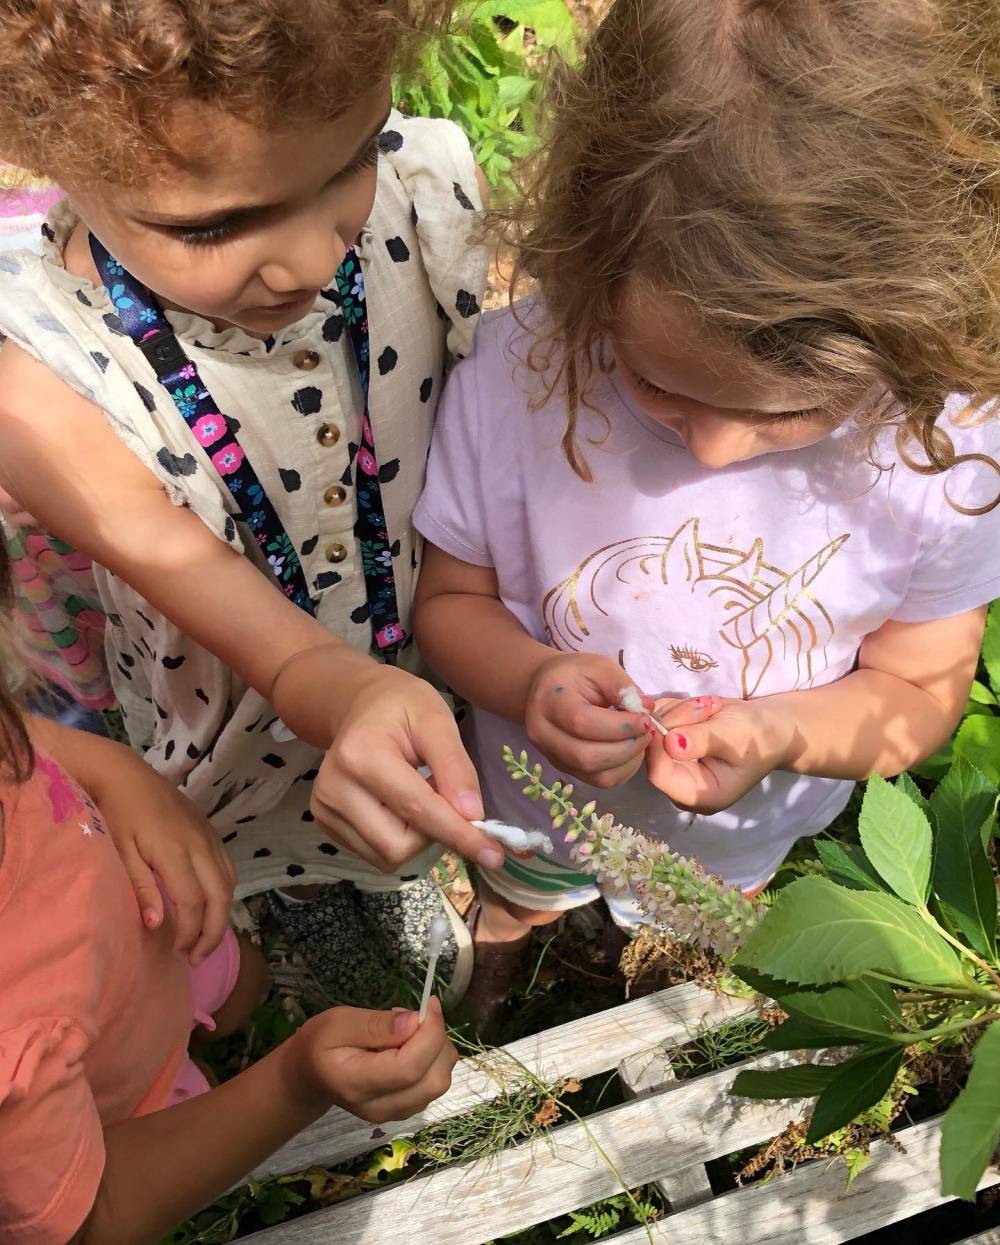 TOP NEW JERSEY SUMMER CAMP: Cora Hartshorn Nature Discovery  is a Top Summer Camp located in Short Hills New Jersey offering many fun and enriching camp programs. 